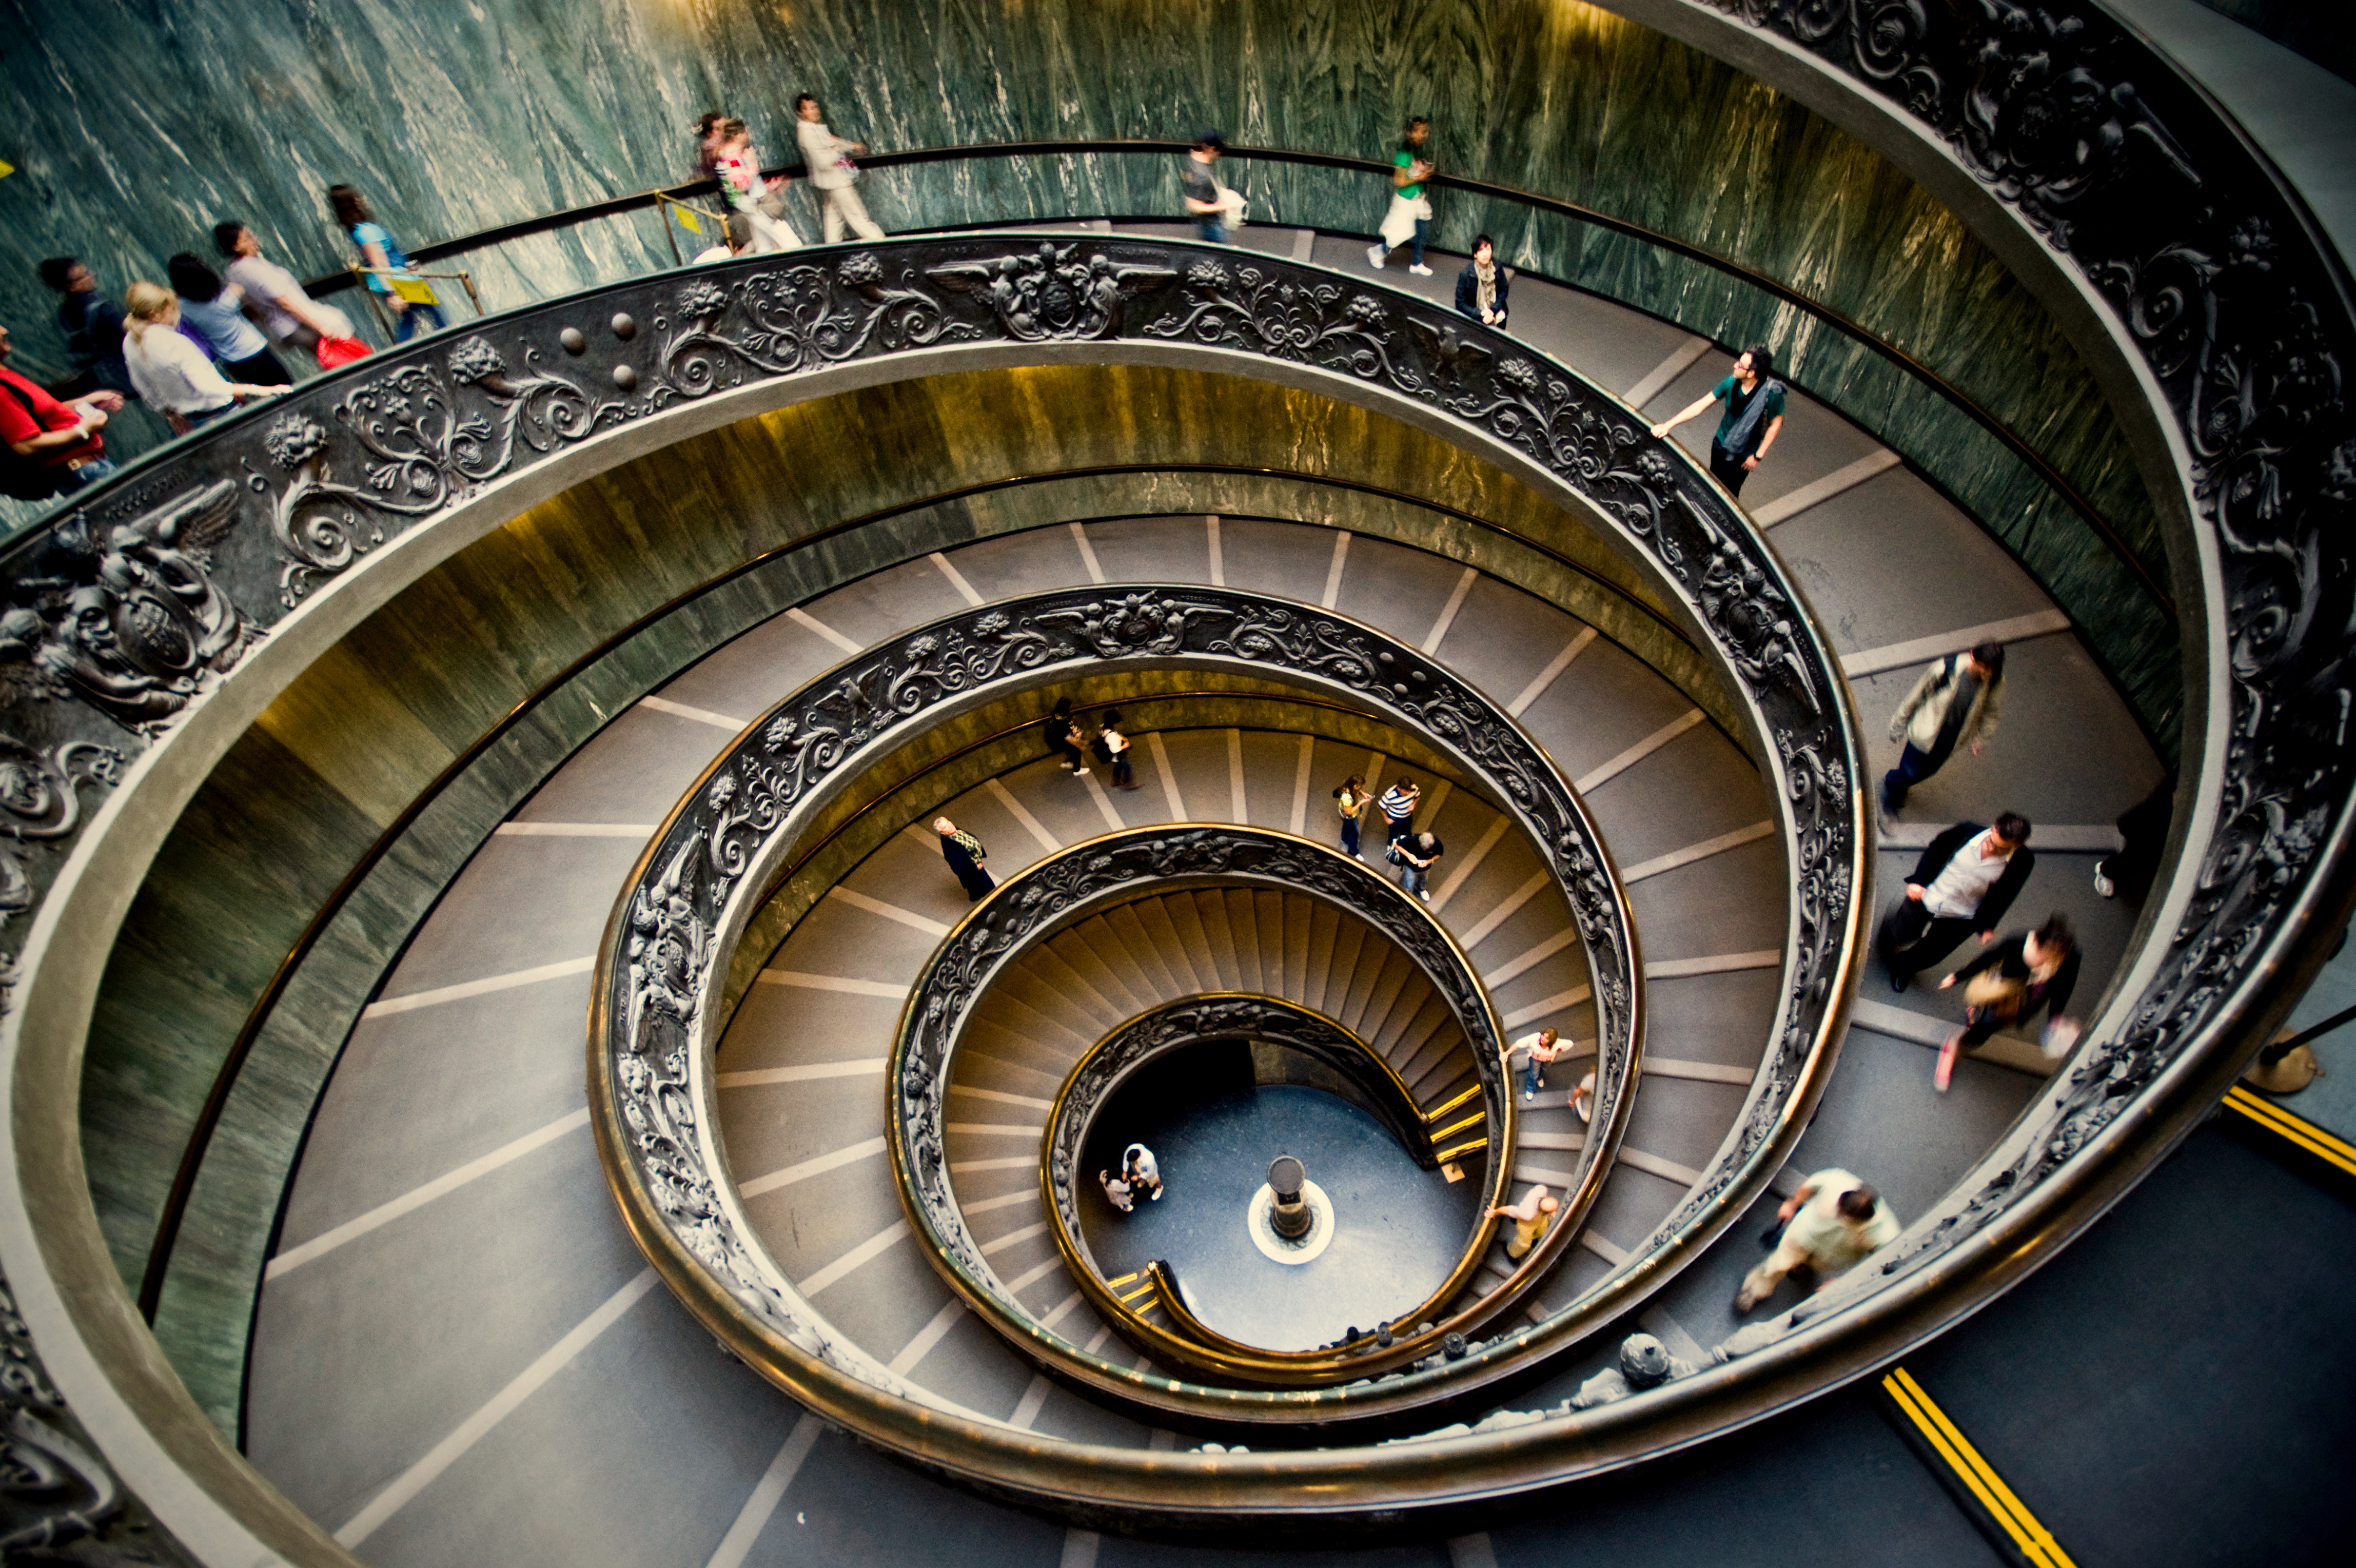 File:Spiral staircase in the Vatican Museums.jpg - Wikimedia Commons